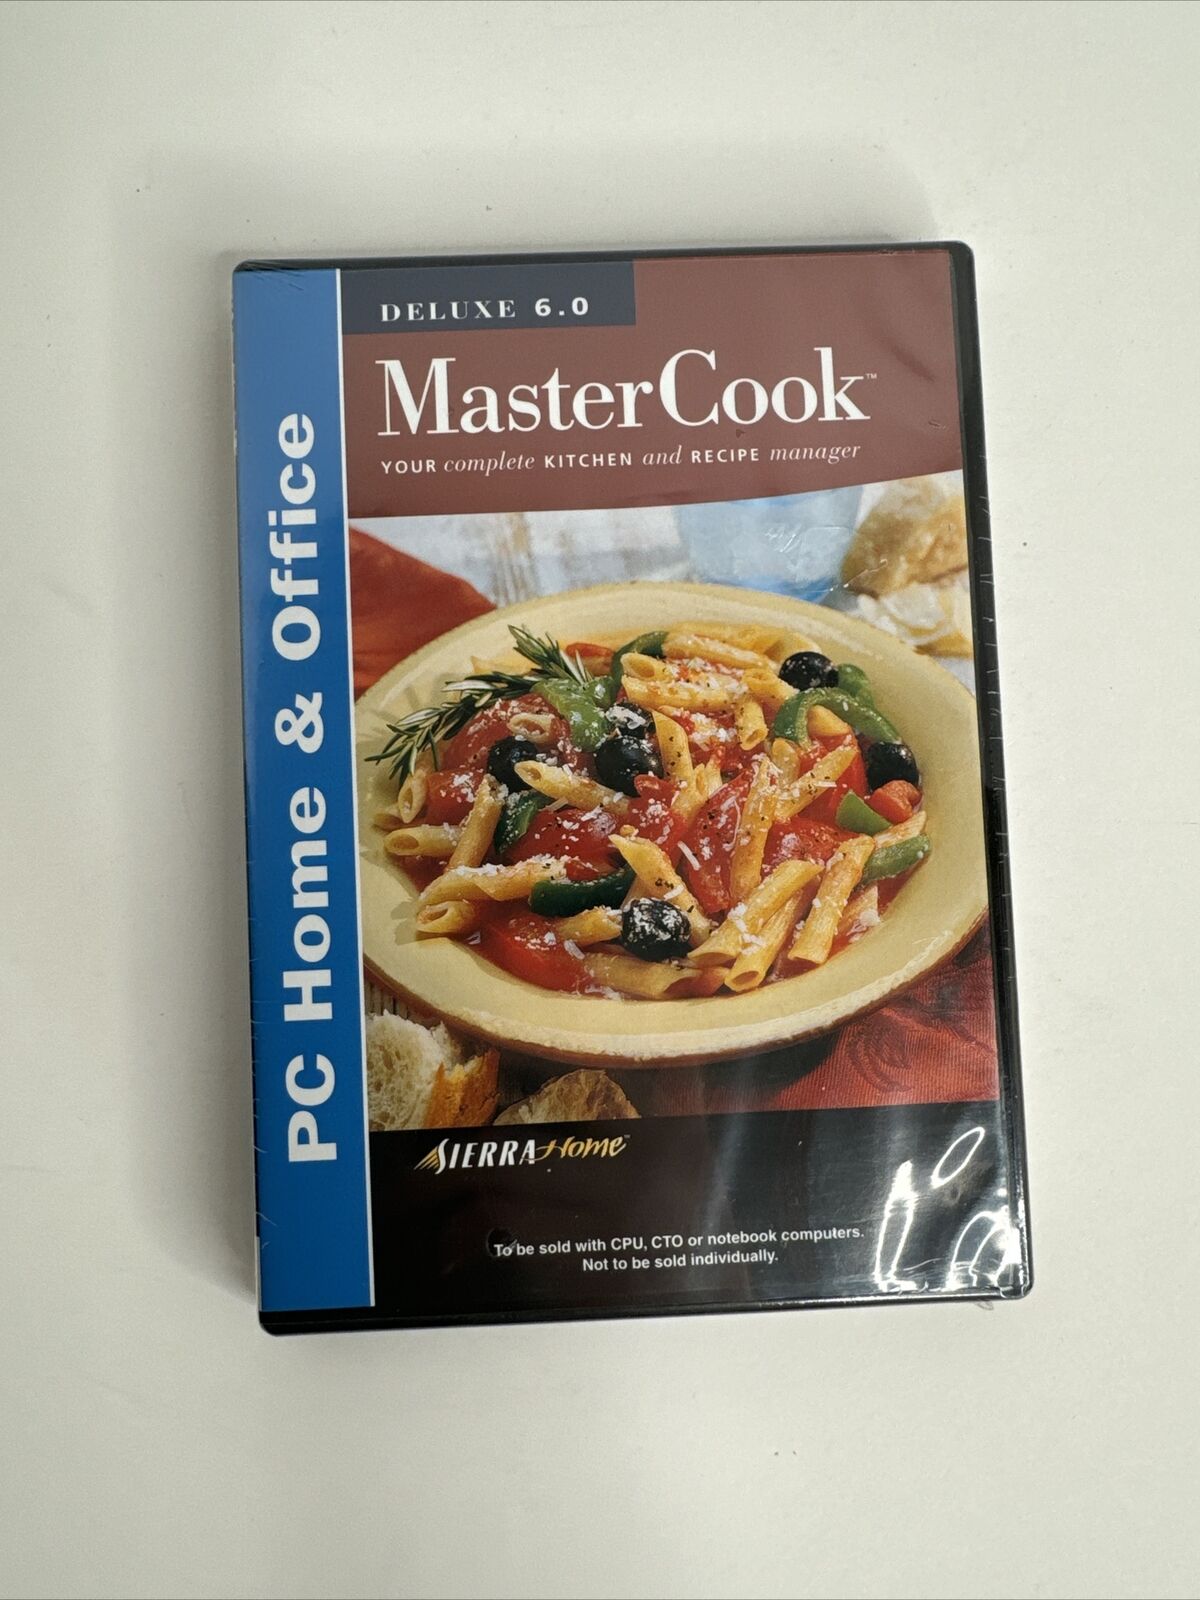 MasterCook Deluxe 6.0 (Windows PC, 2001) Cooking Recipe Manager & Teacher - New